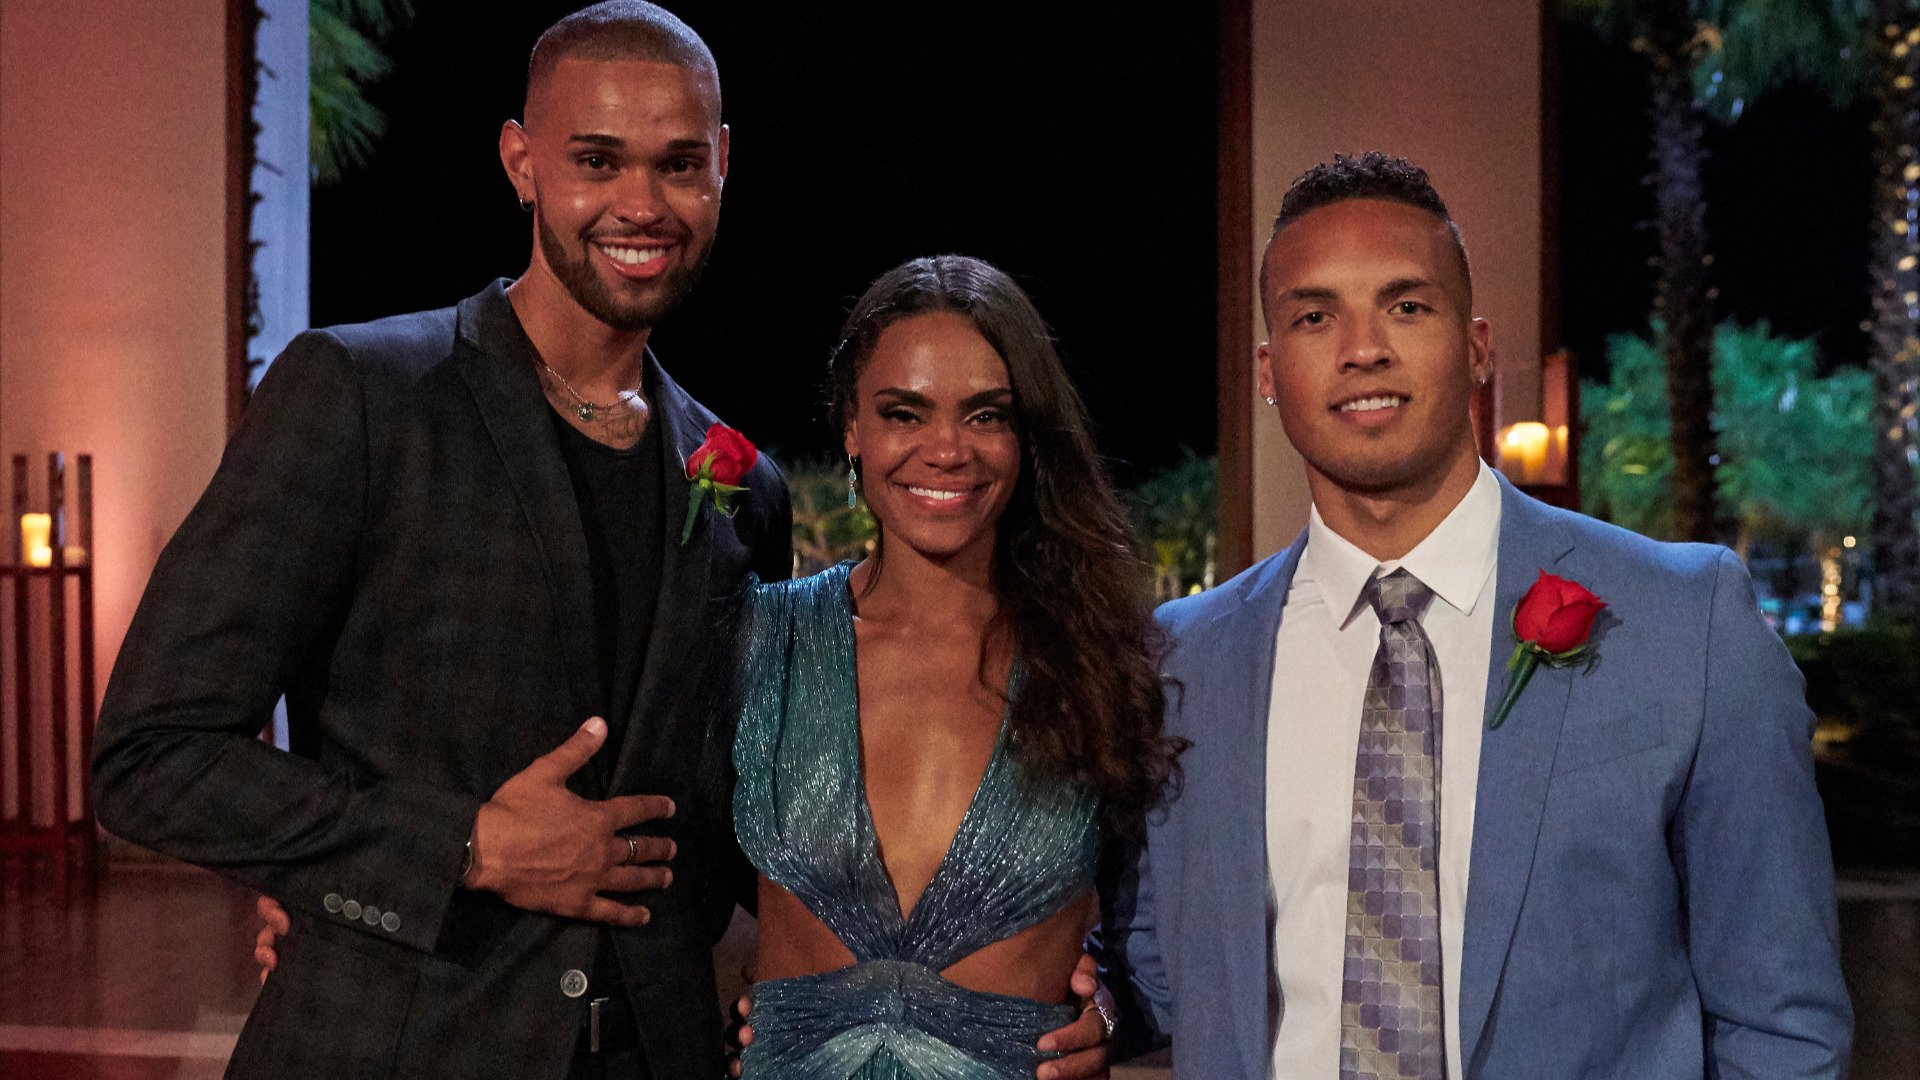 ‘The Bachelorette’ Finale Recap: Did Michelle Young End Up With Nayte Olukoya or Brandon Jones?